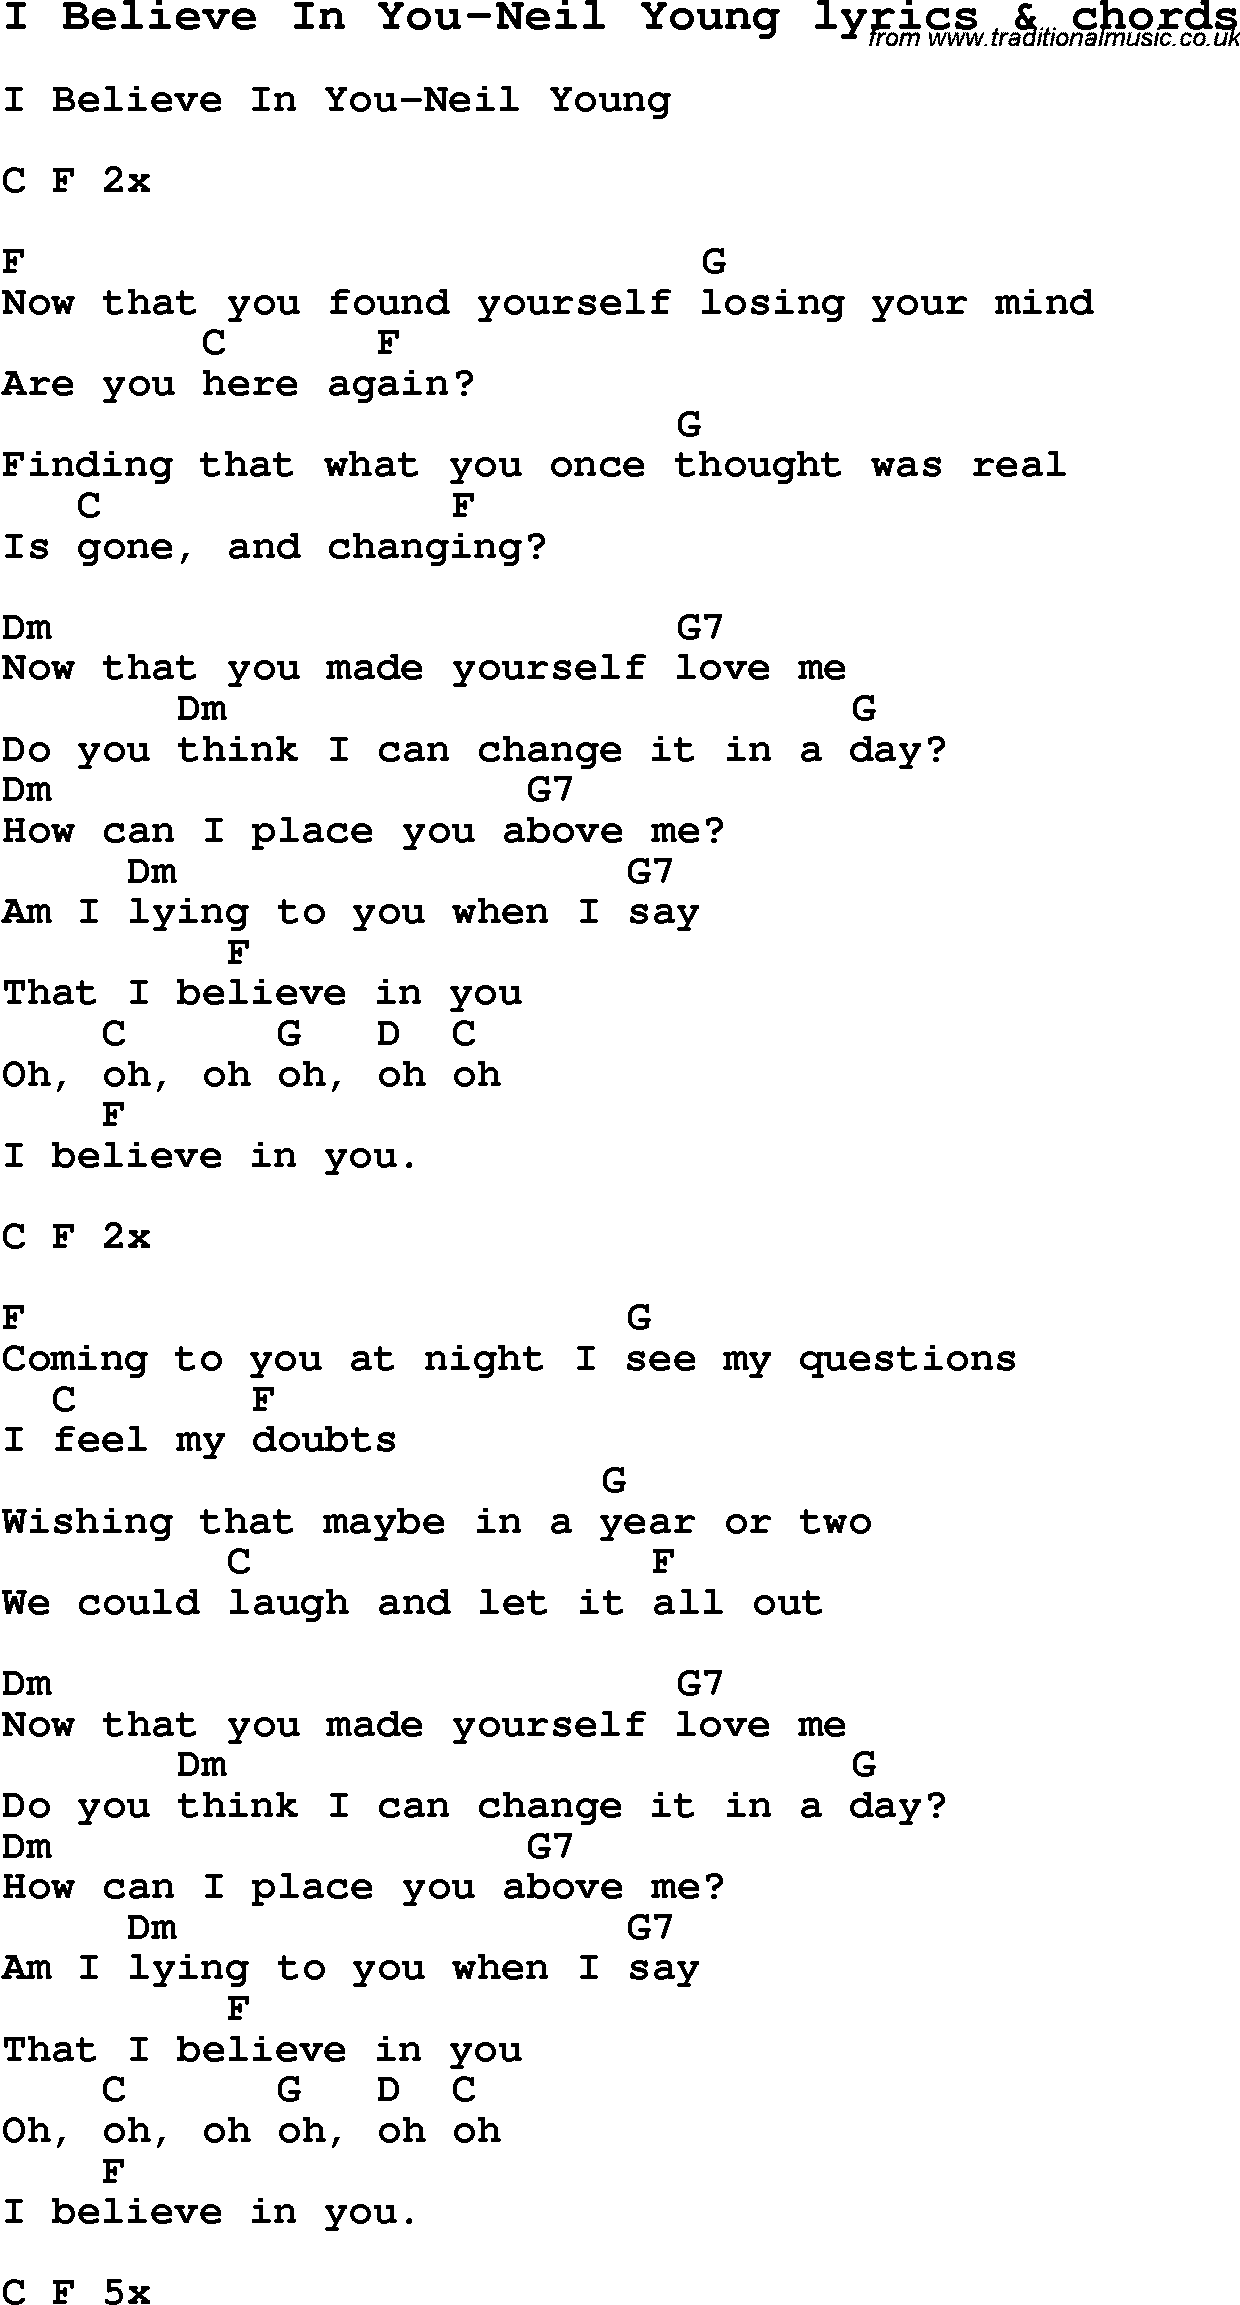 Love Song Lyrics for: I Believe In You-Neil Young with chords for Ukulele, Guitar Banjo etc.